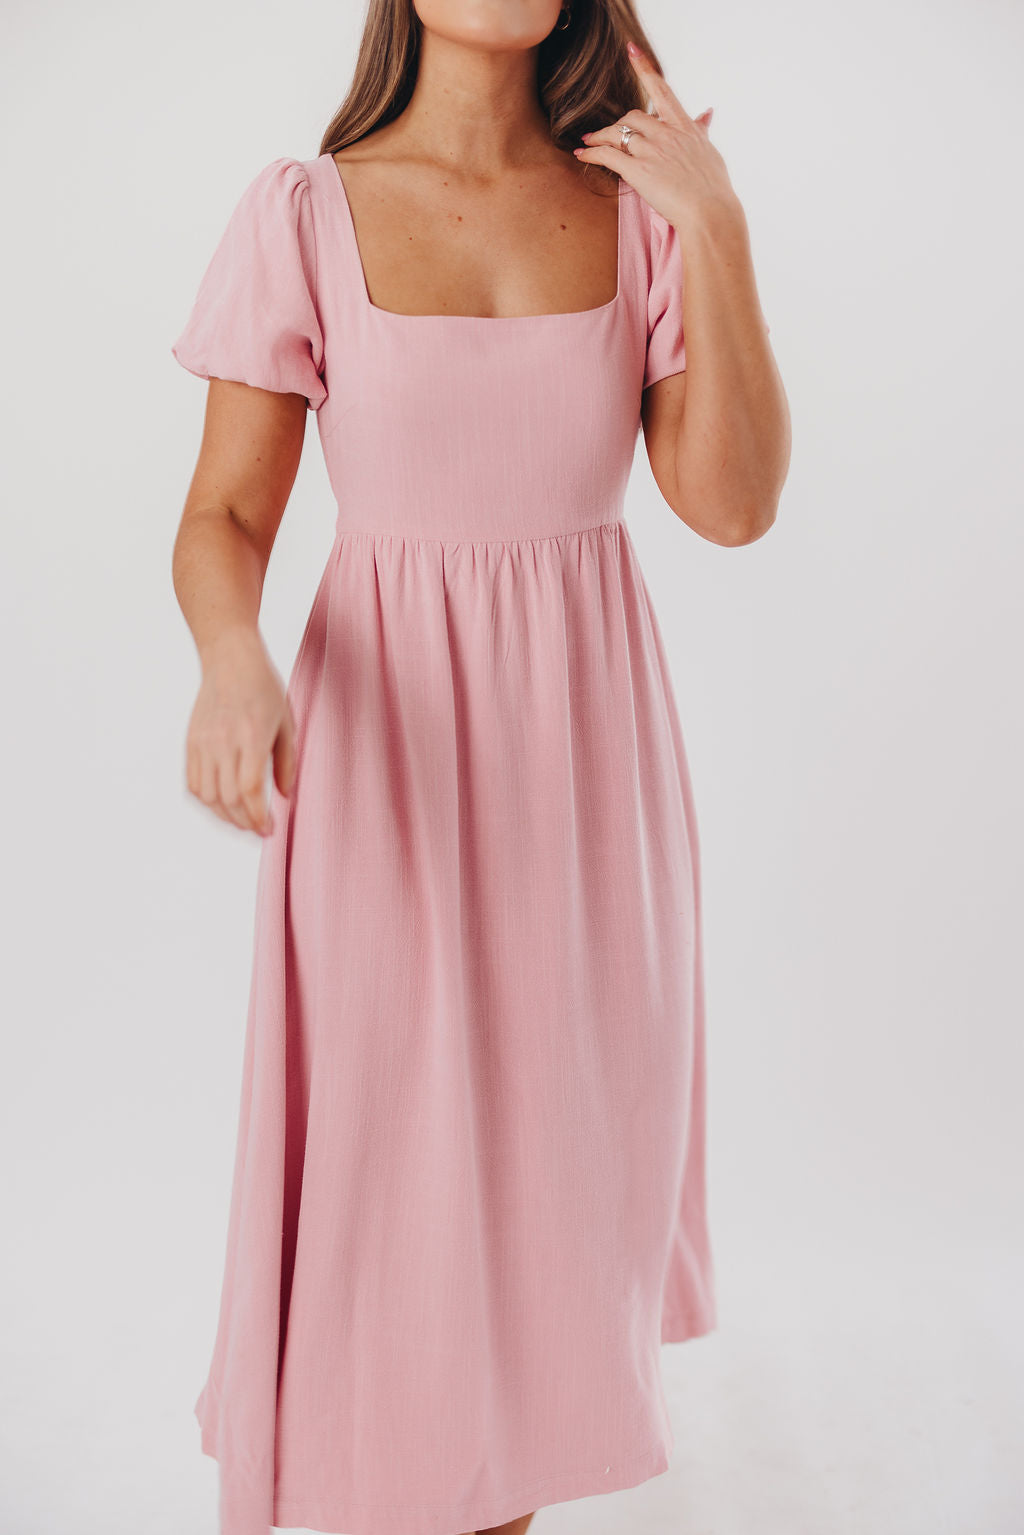 Ainsley Square Neck Midi Dress with Puffed Sleeves in Bright Blush - Bump Friendly & Inclusive Sizing (S-3XL)